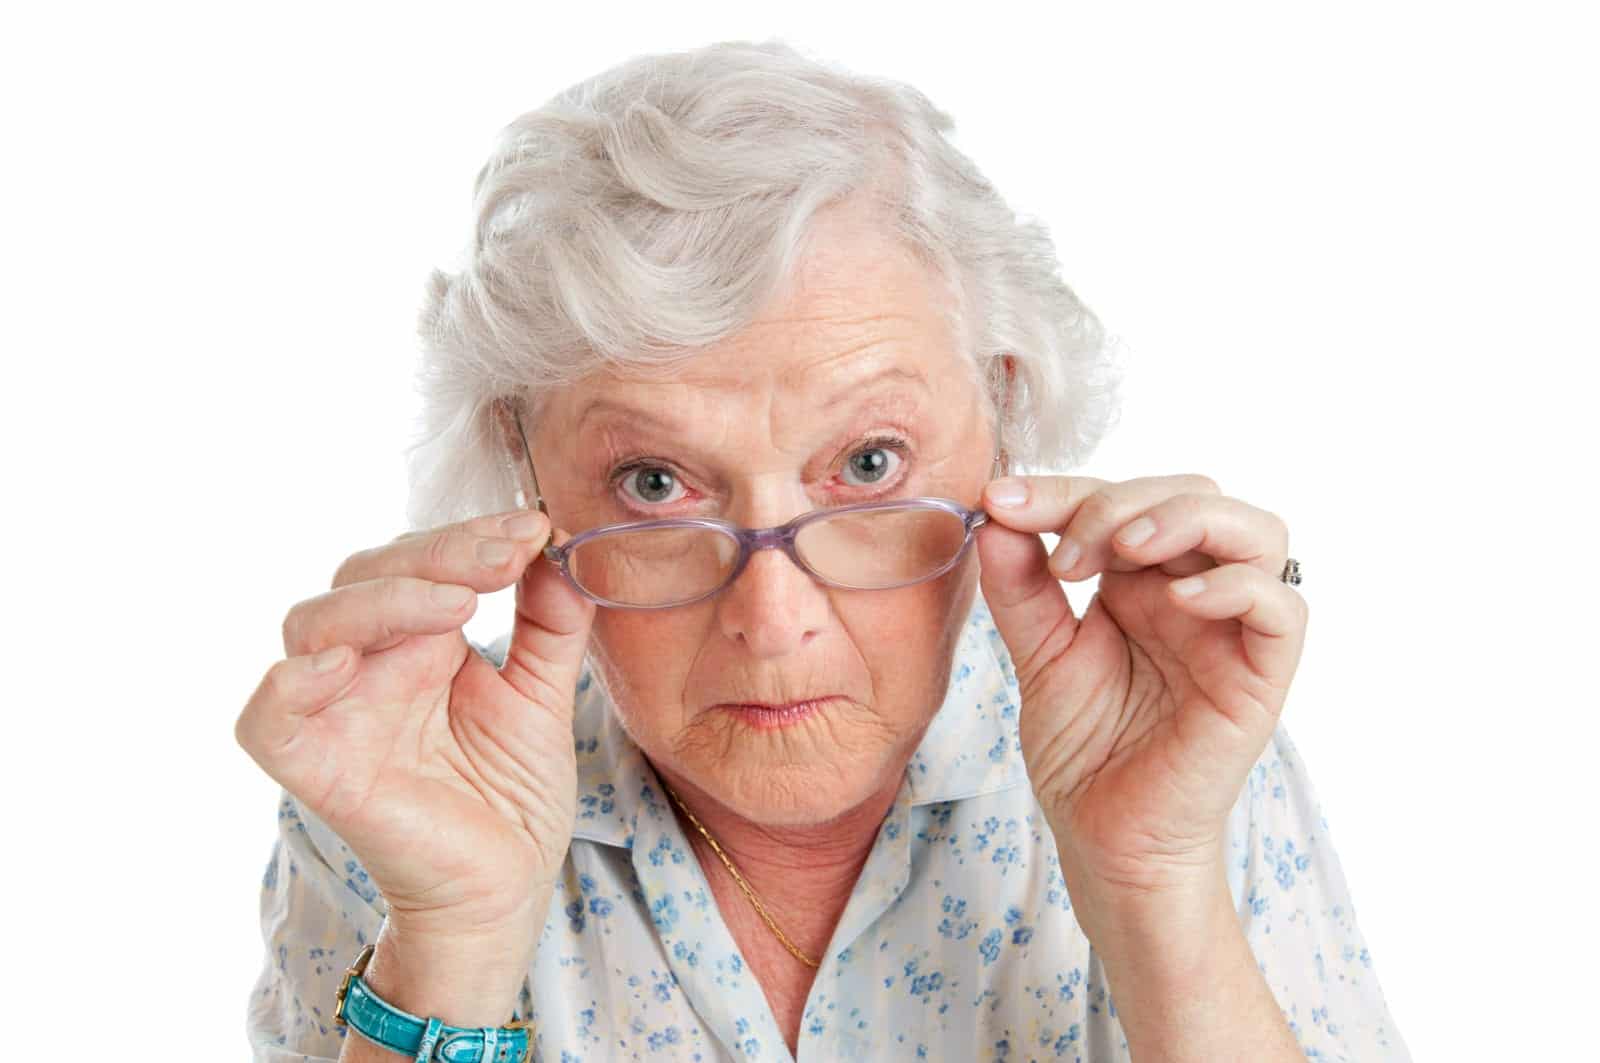 does Medicare cover glasses